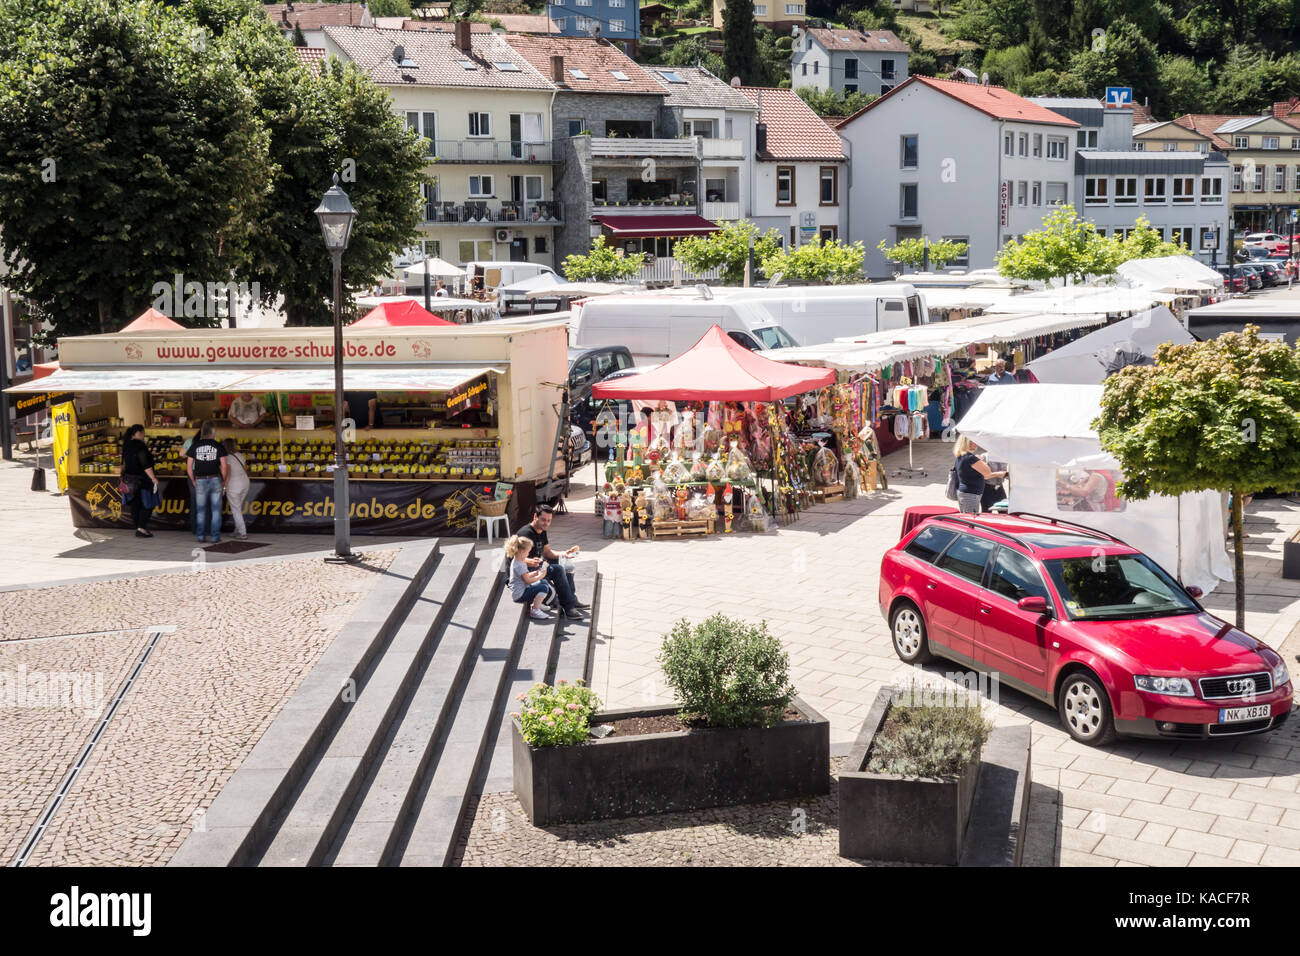 METTLACH, GERMANY - 6TH Aug 17:  A Sunday market is open for local and tourists by the pier. Stock Photo